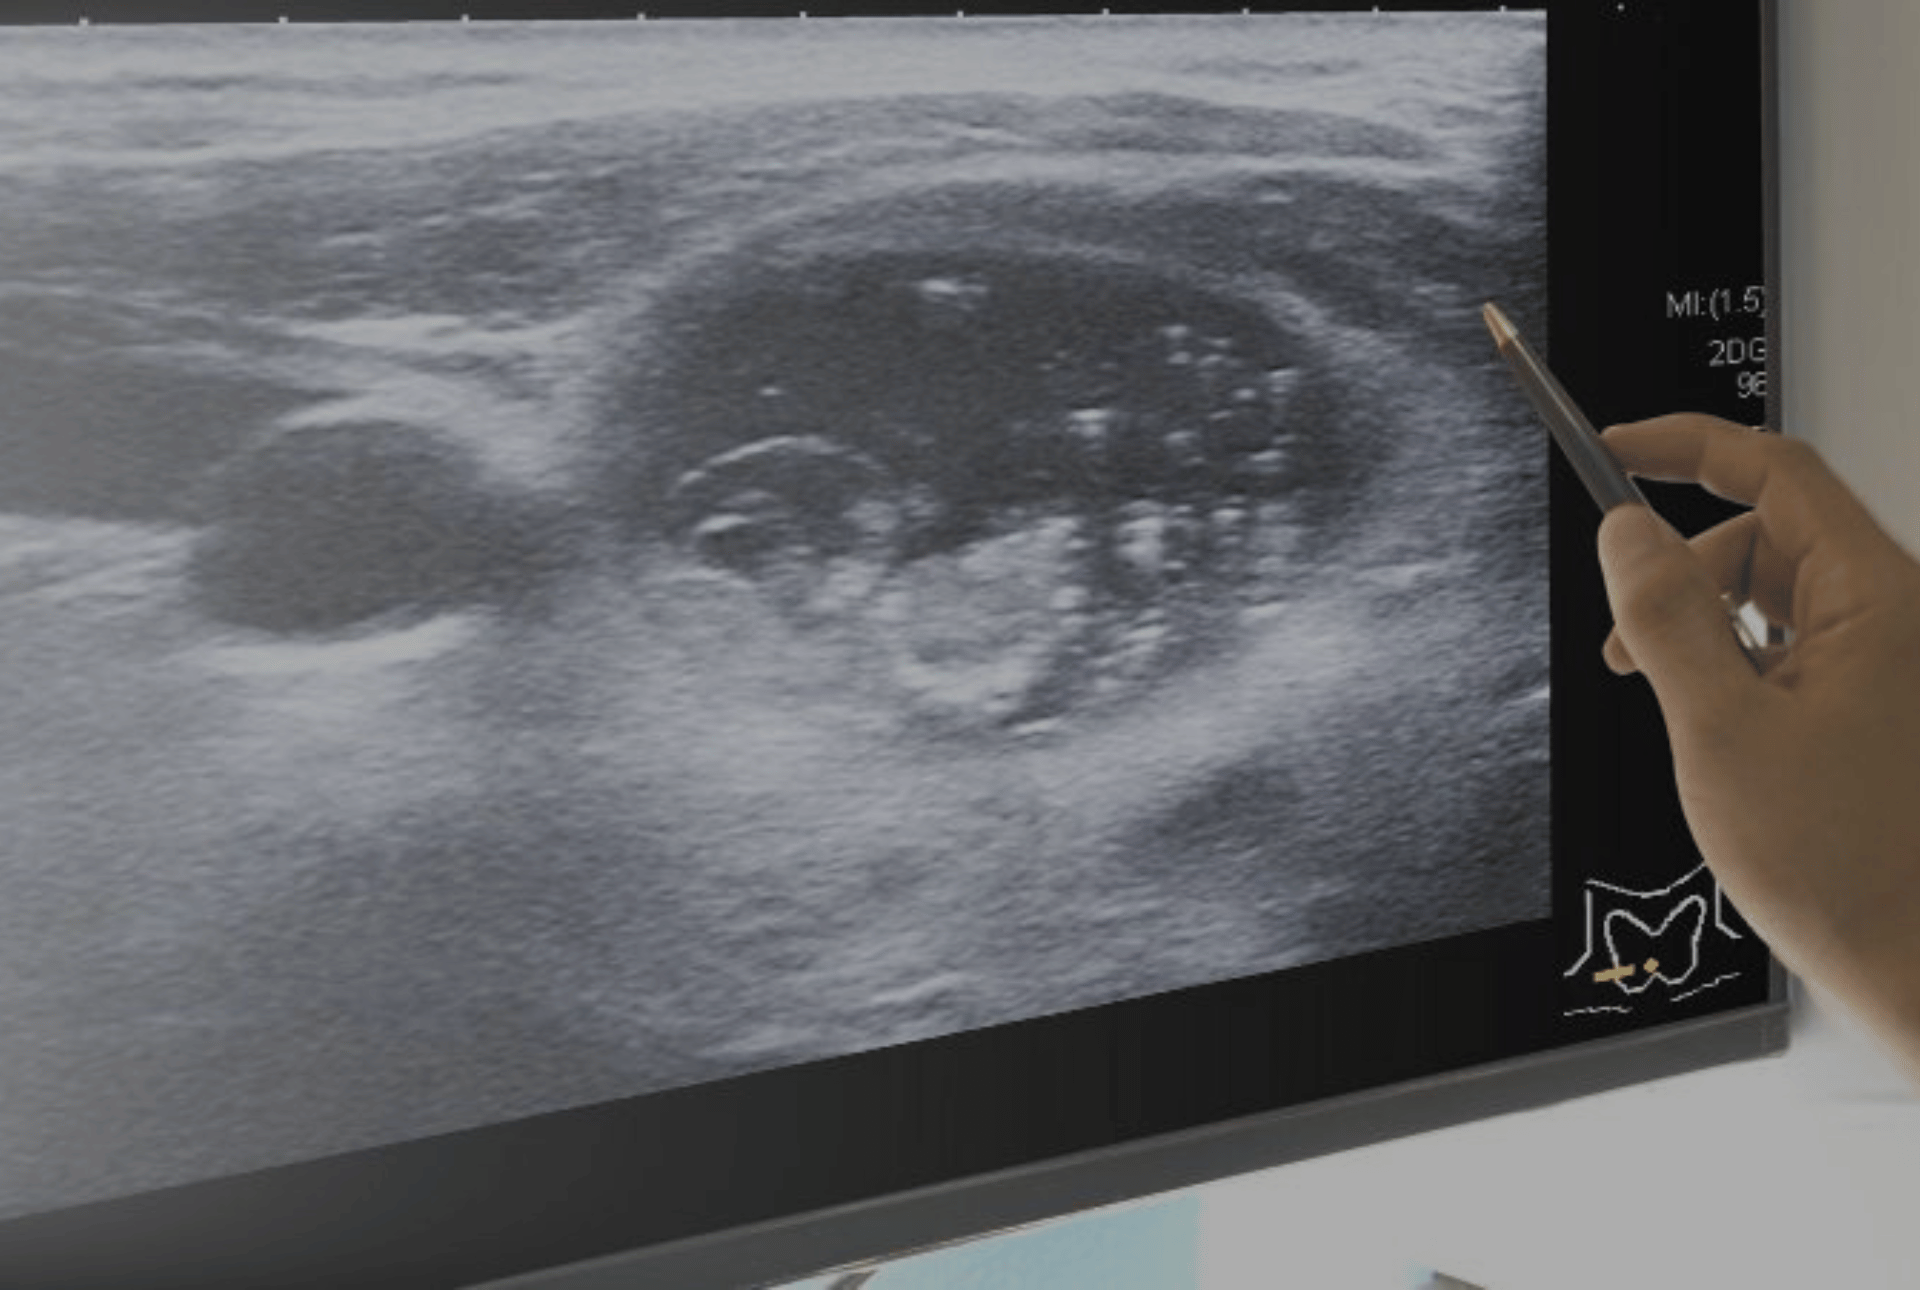 Thyroid detection on ultrasound images with AI